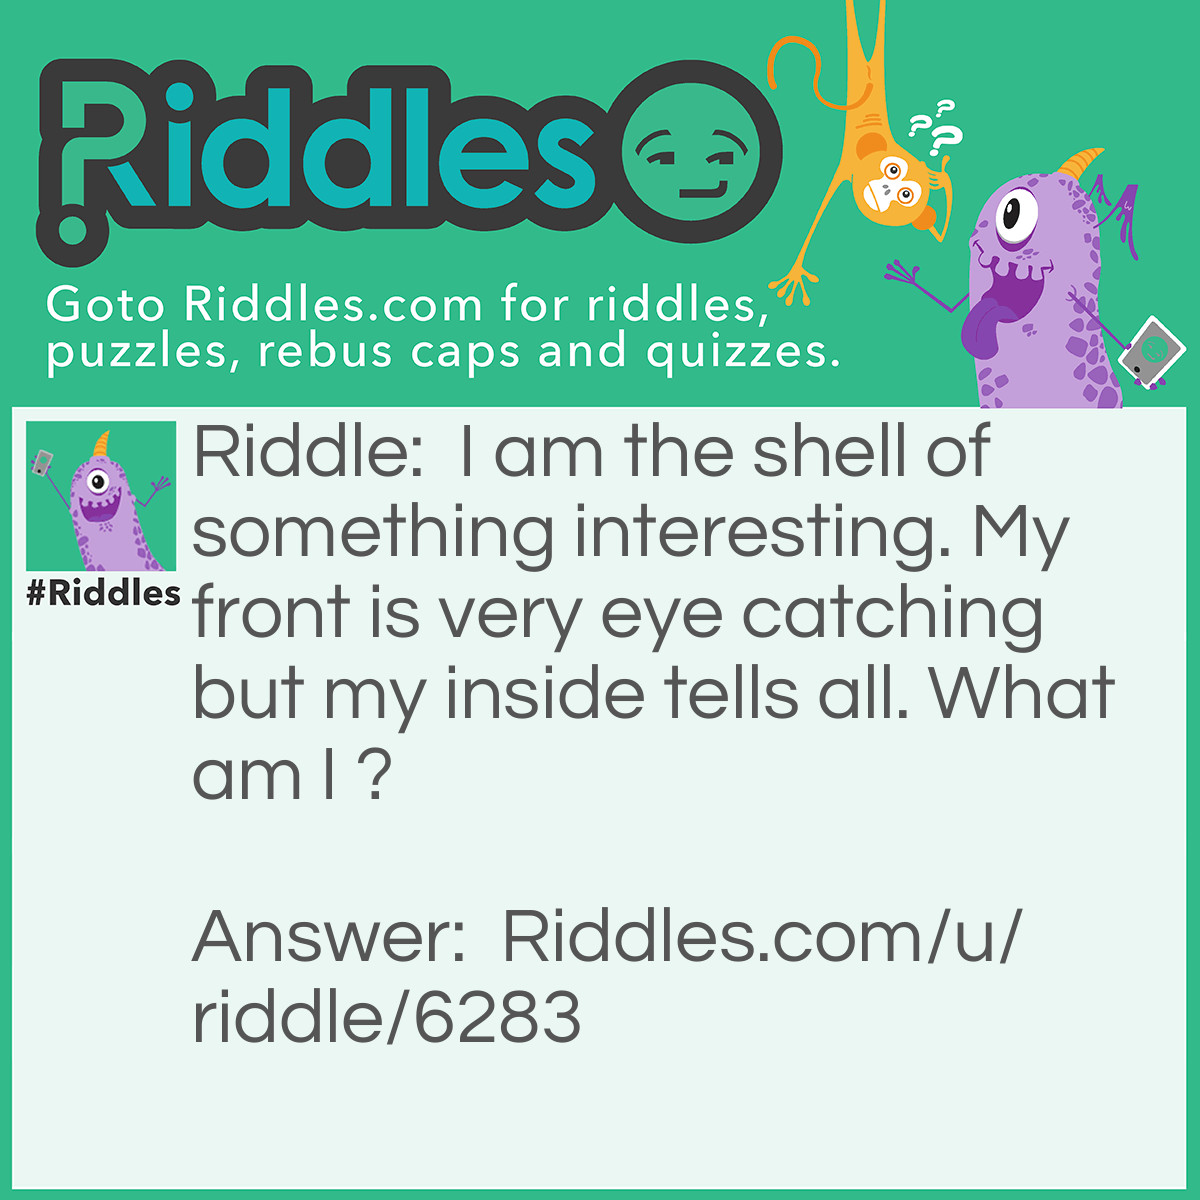 Riddle: I am the shell of something interesting. My front is very eye catching but my inside tells all. What am I ? Answer: A Book.